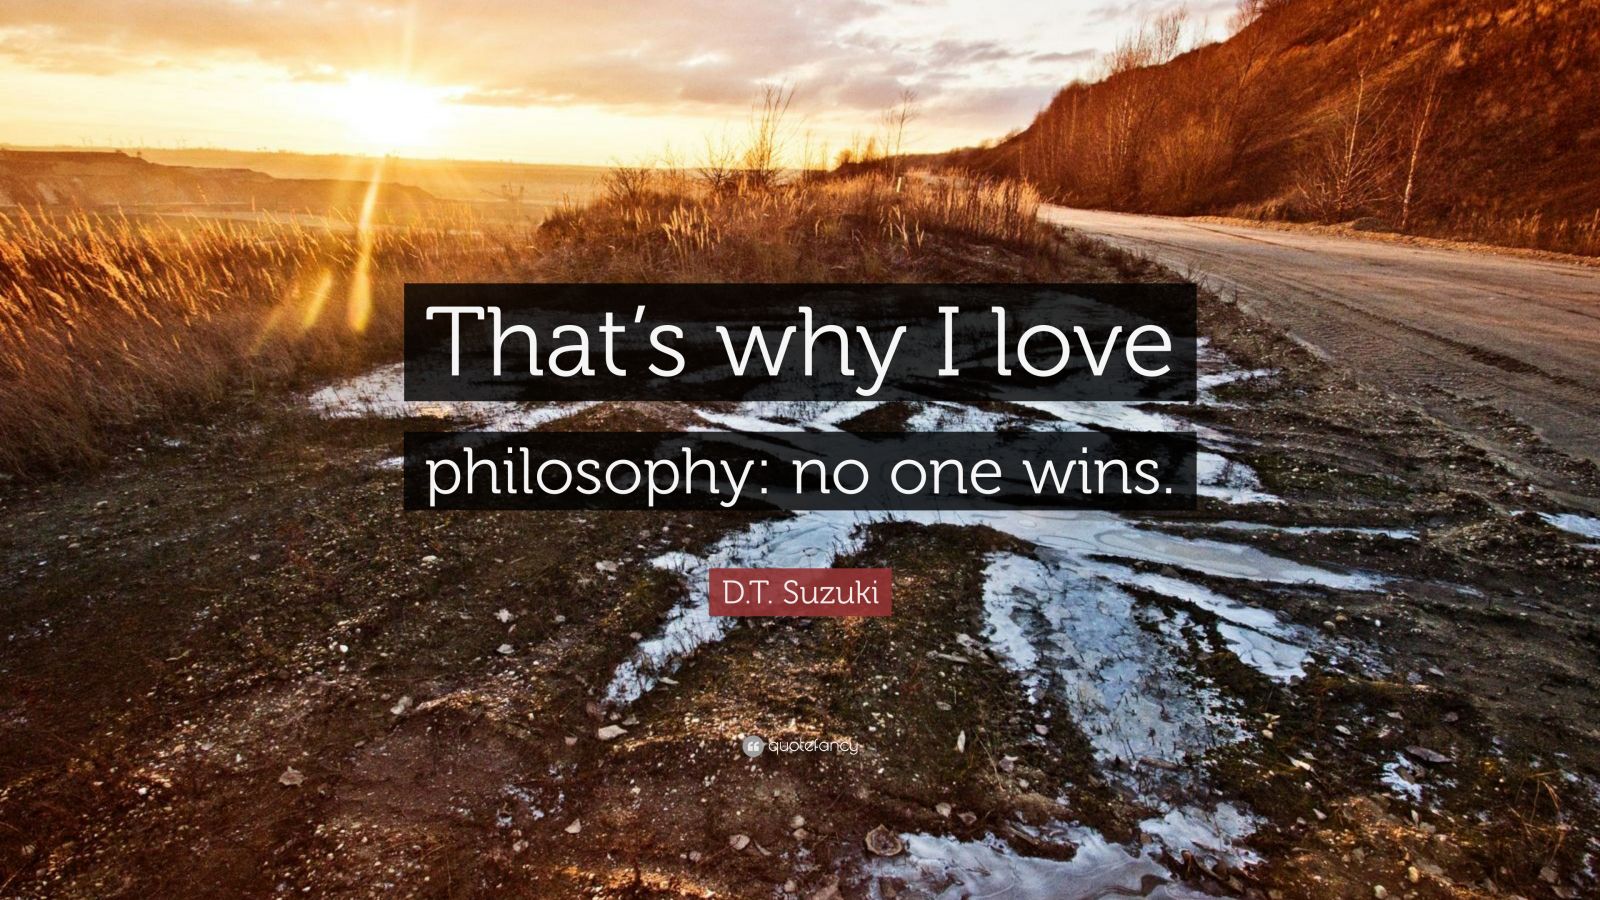 D.T. Suzuki Quote: “That’s why I love philosophy: no one wins.” (12